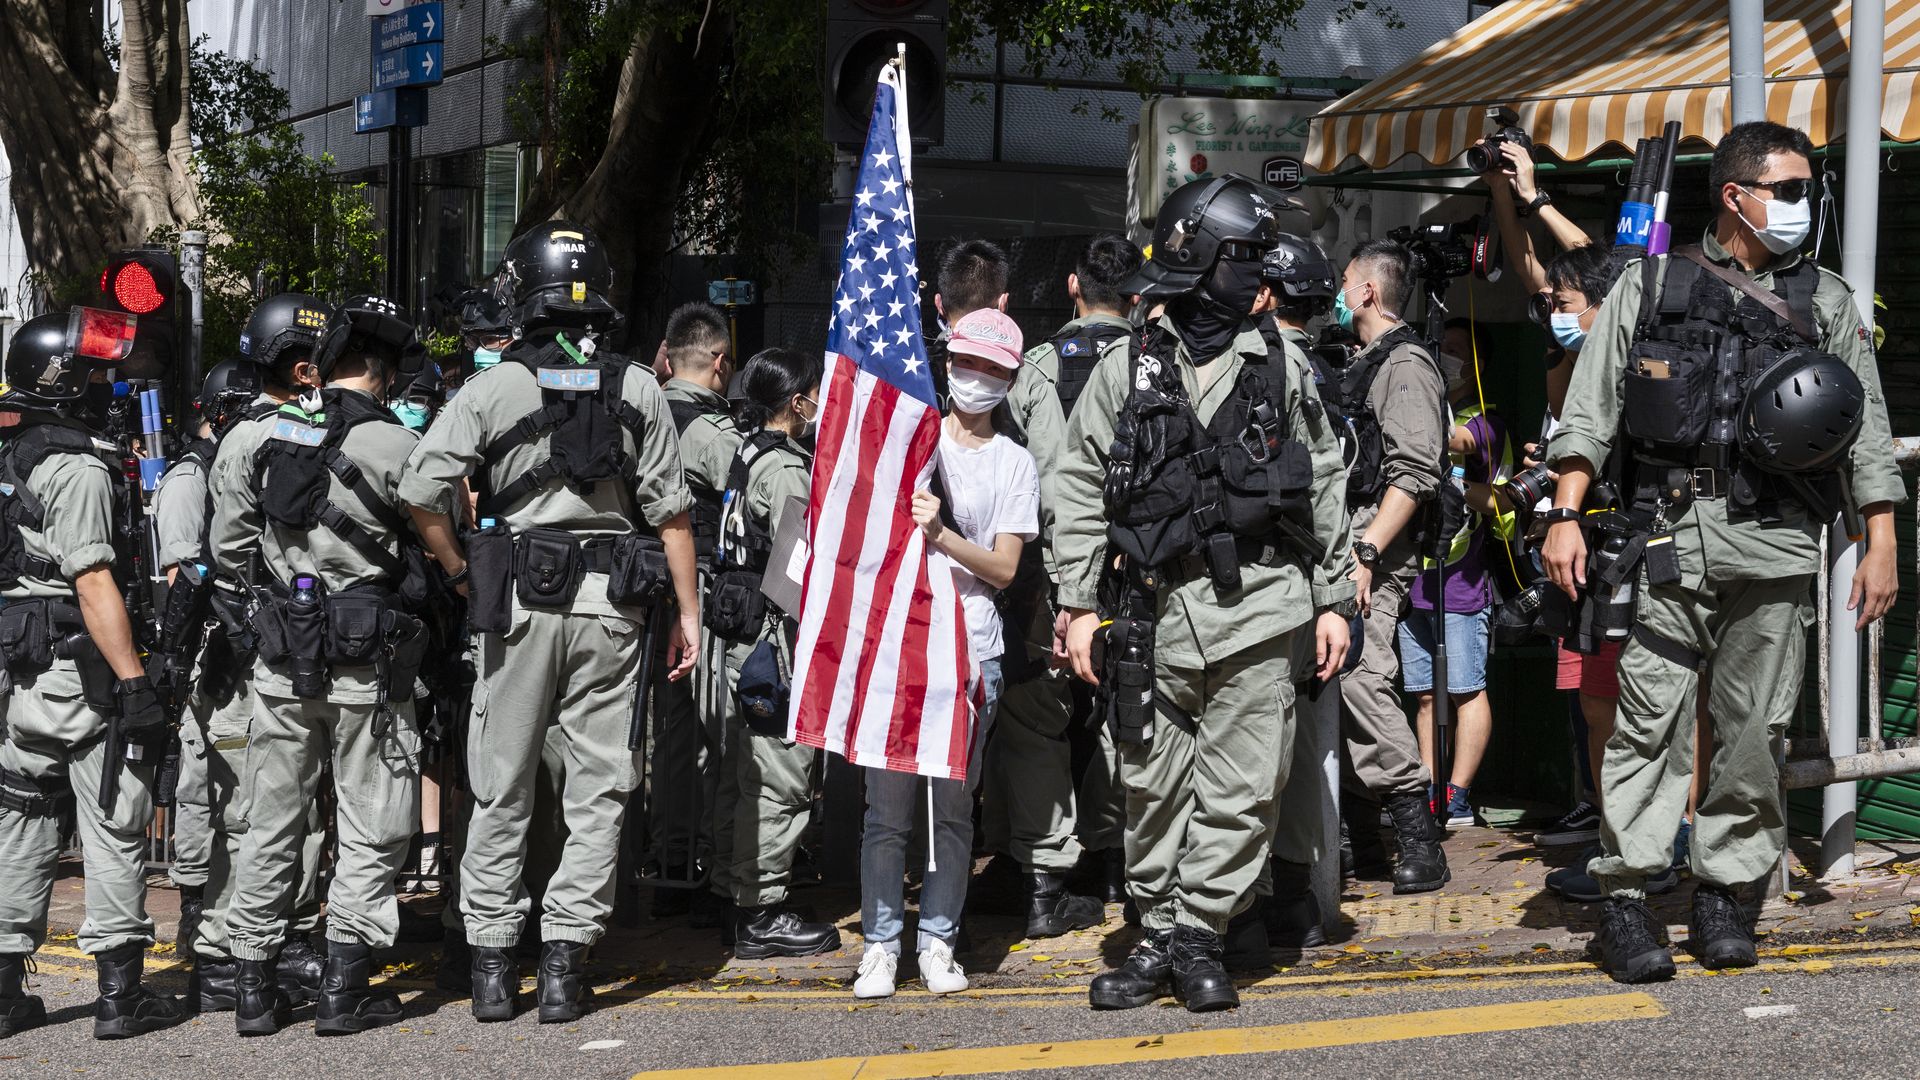 Police officers surround a woman holding an US flag during a march to celebrate US Independence Day outside the US consulate in Hong Kong on July 4